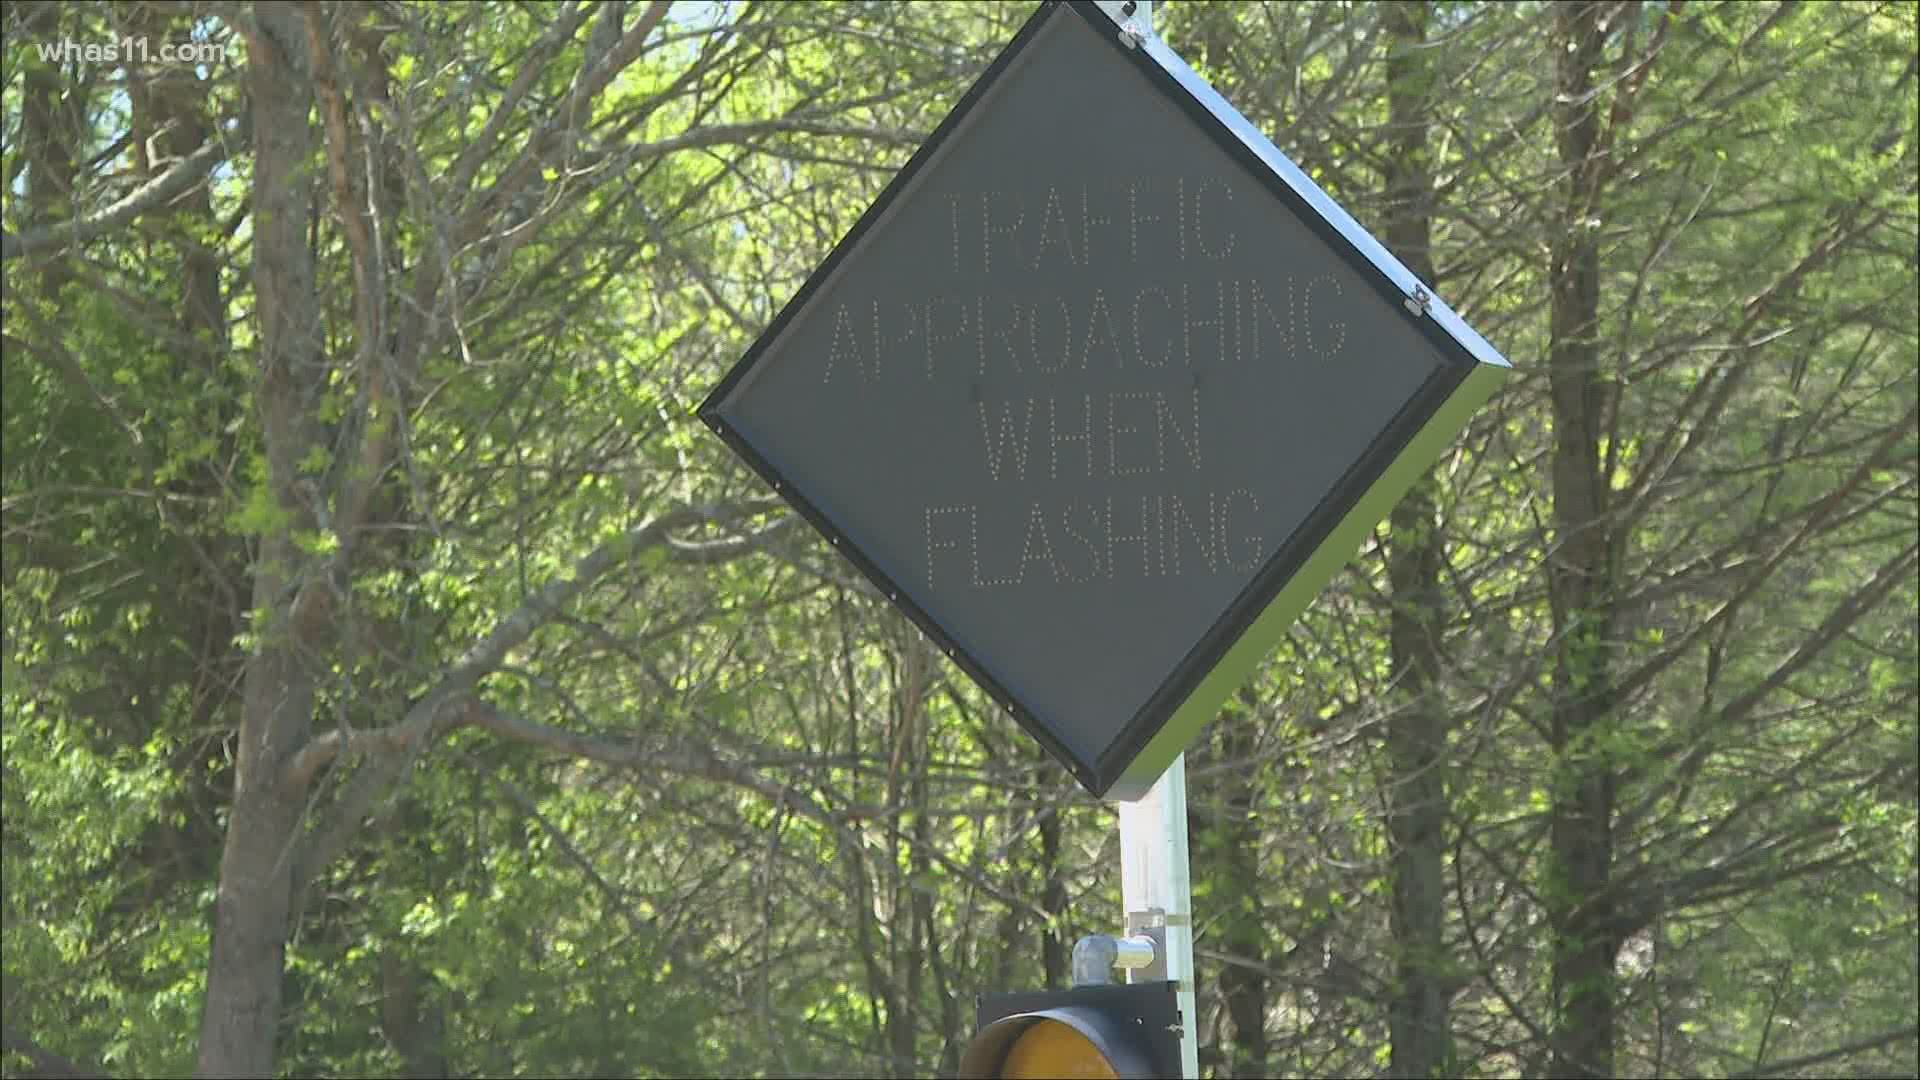 Next week, two new intersection warning systems will be activated in southern Indiana. The systems can reduce severe crashes by 20-30%, FHA says.